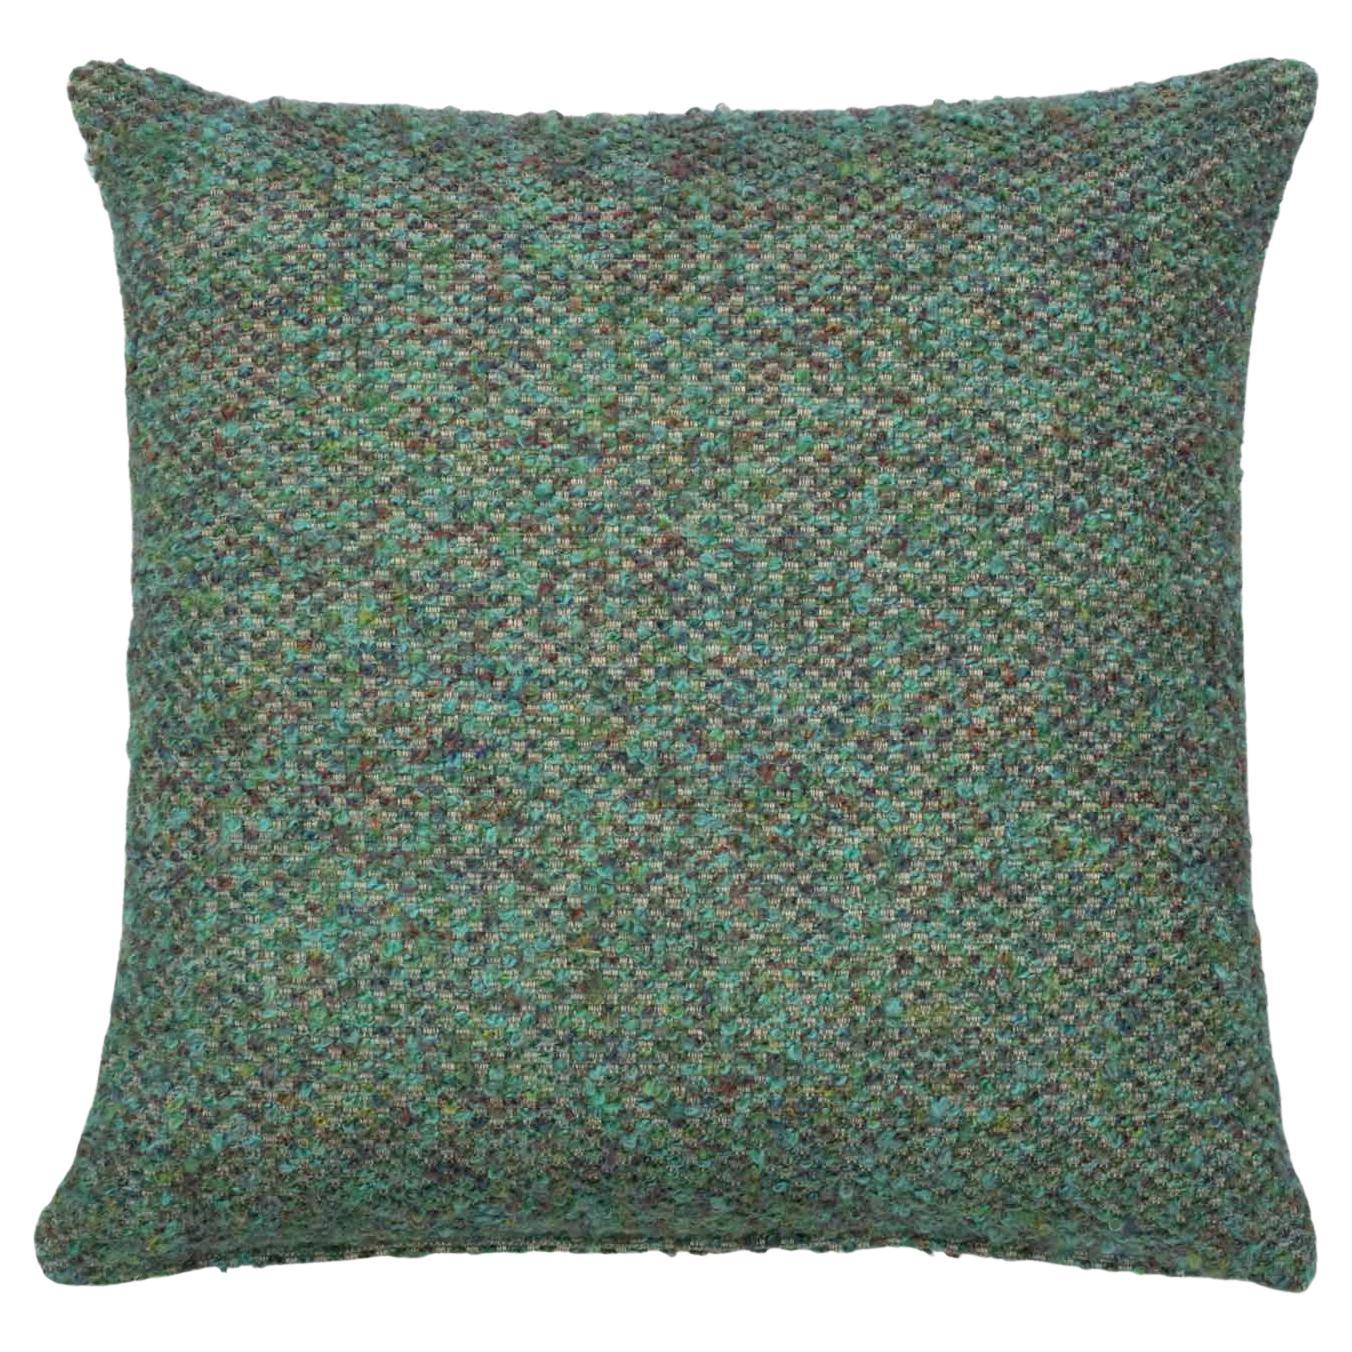 Modern Textured Throw Pillow Turquoise Blue "Brazil" by Evolution21 For Sale